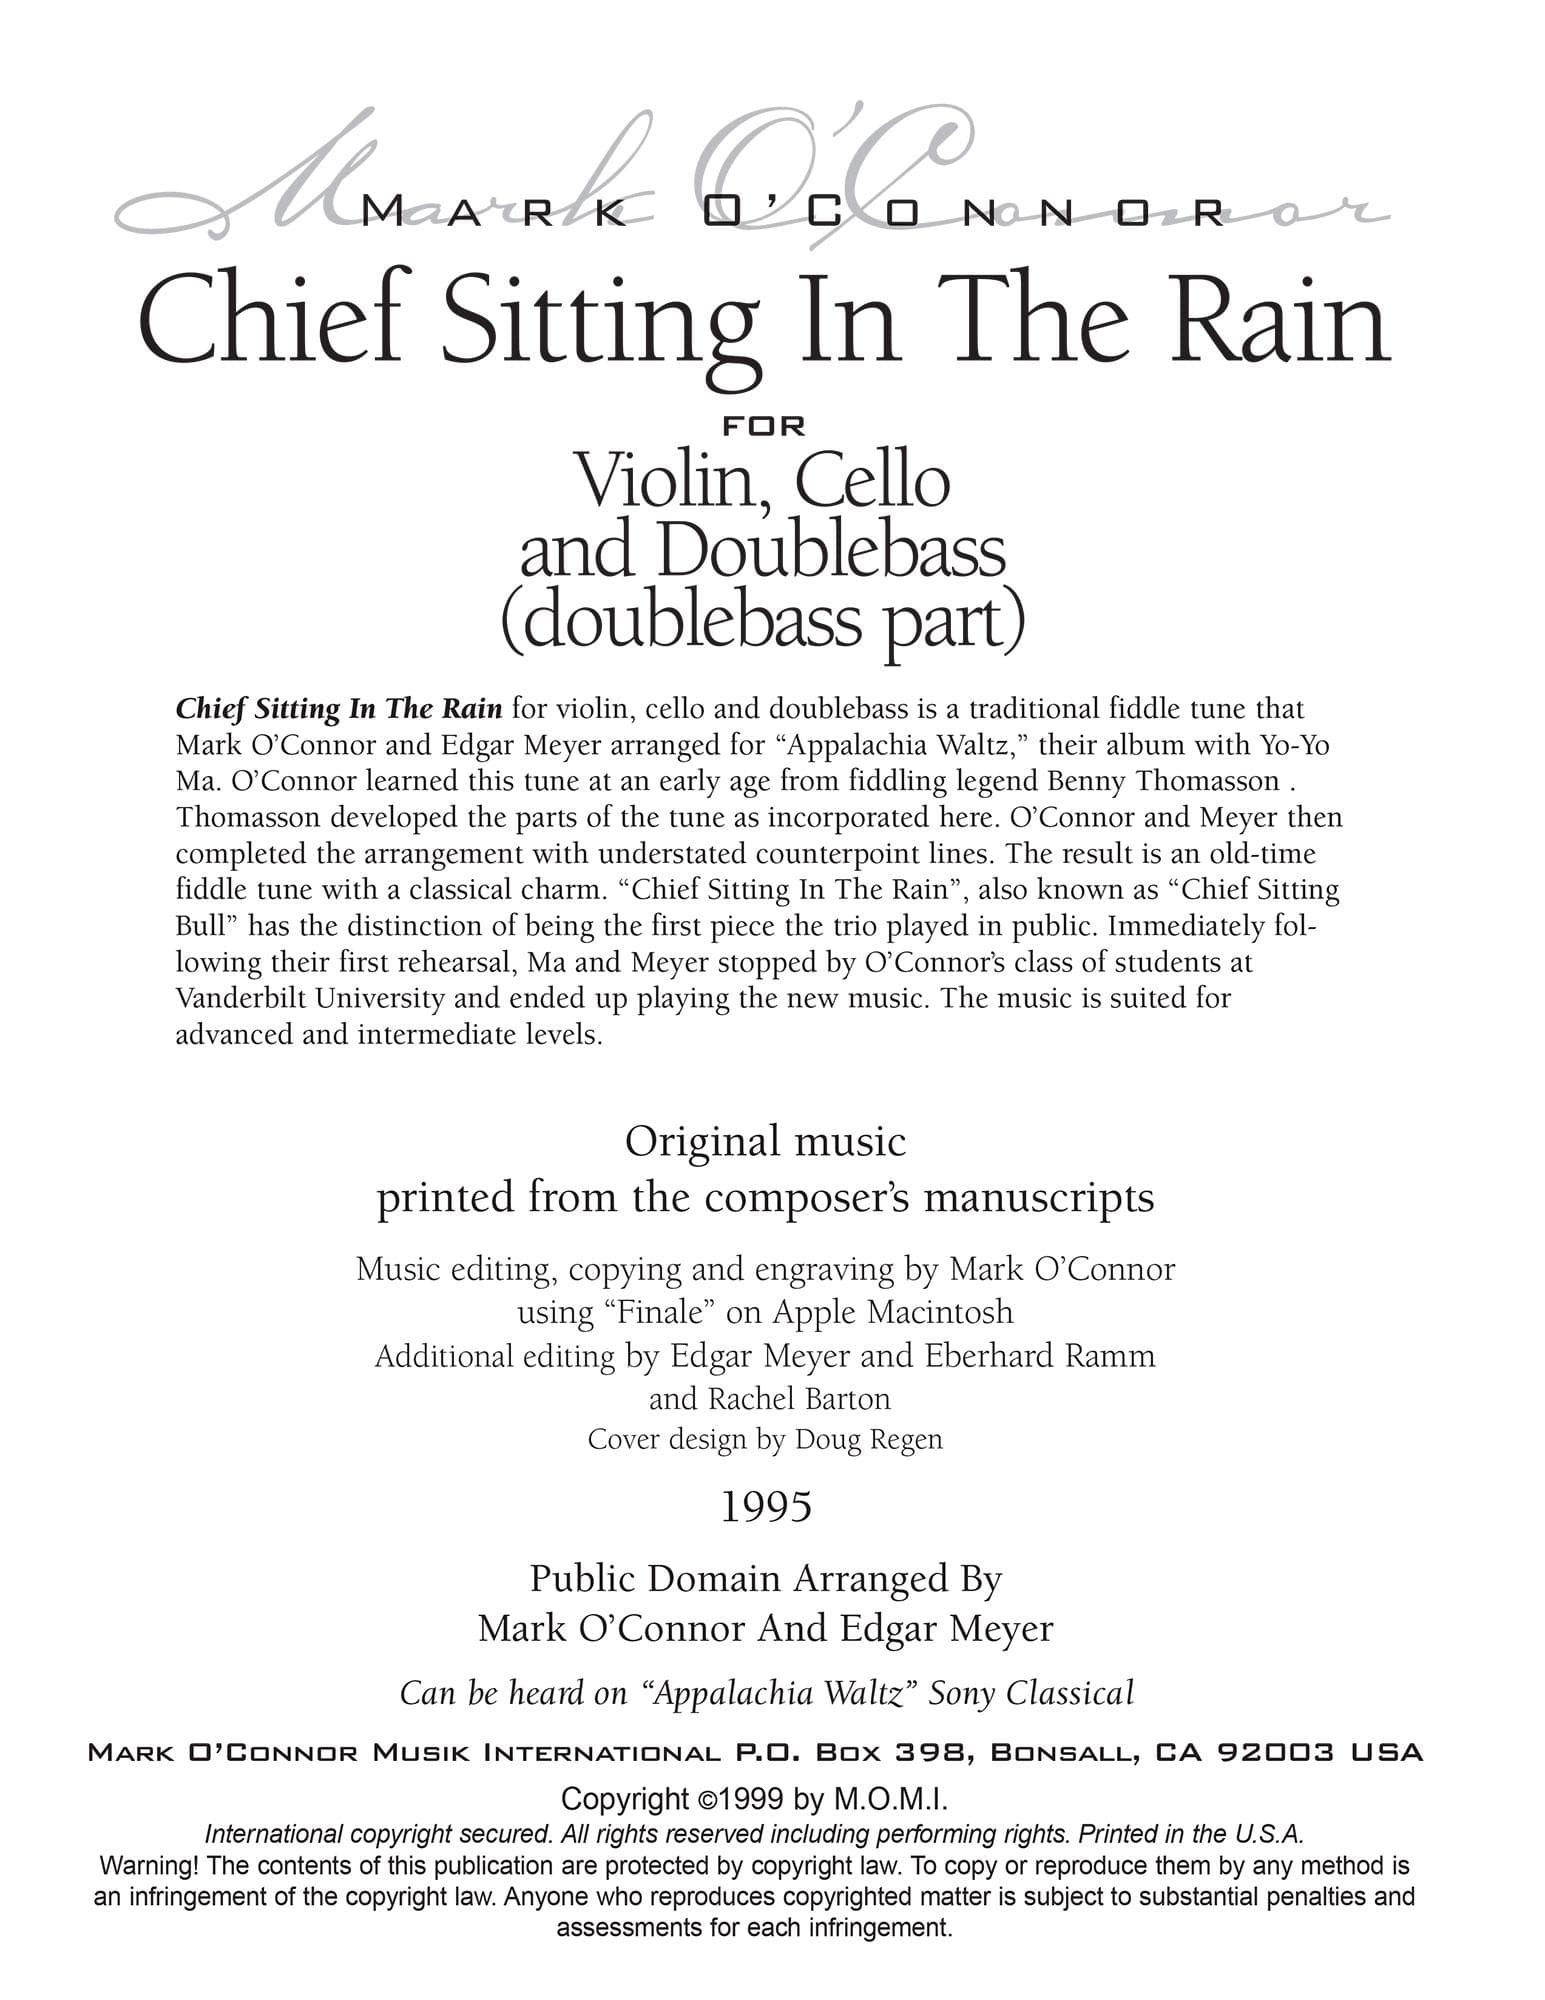 O'Connor, Mark - Chief Sitting In The Rain for Violin, Cello, and Bass - Bass - Digital Download